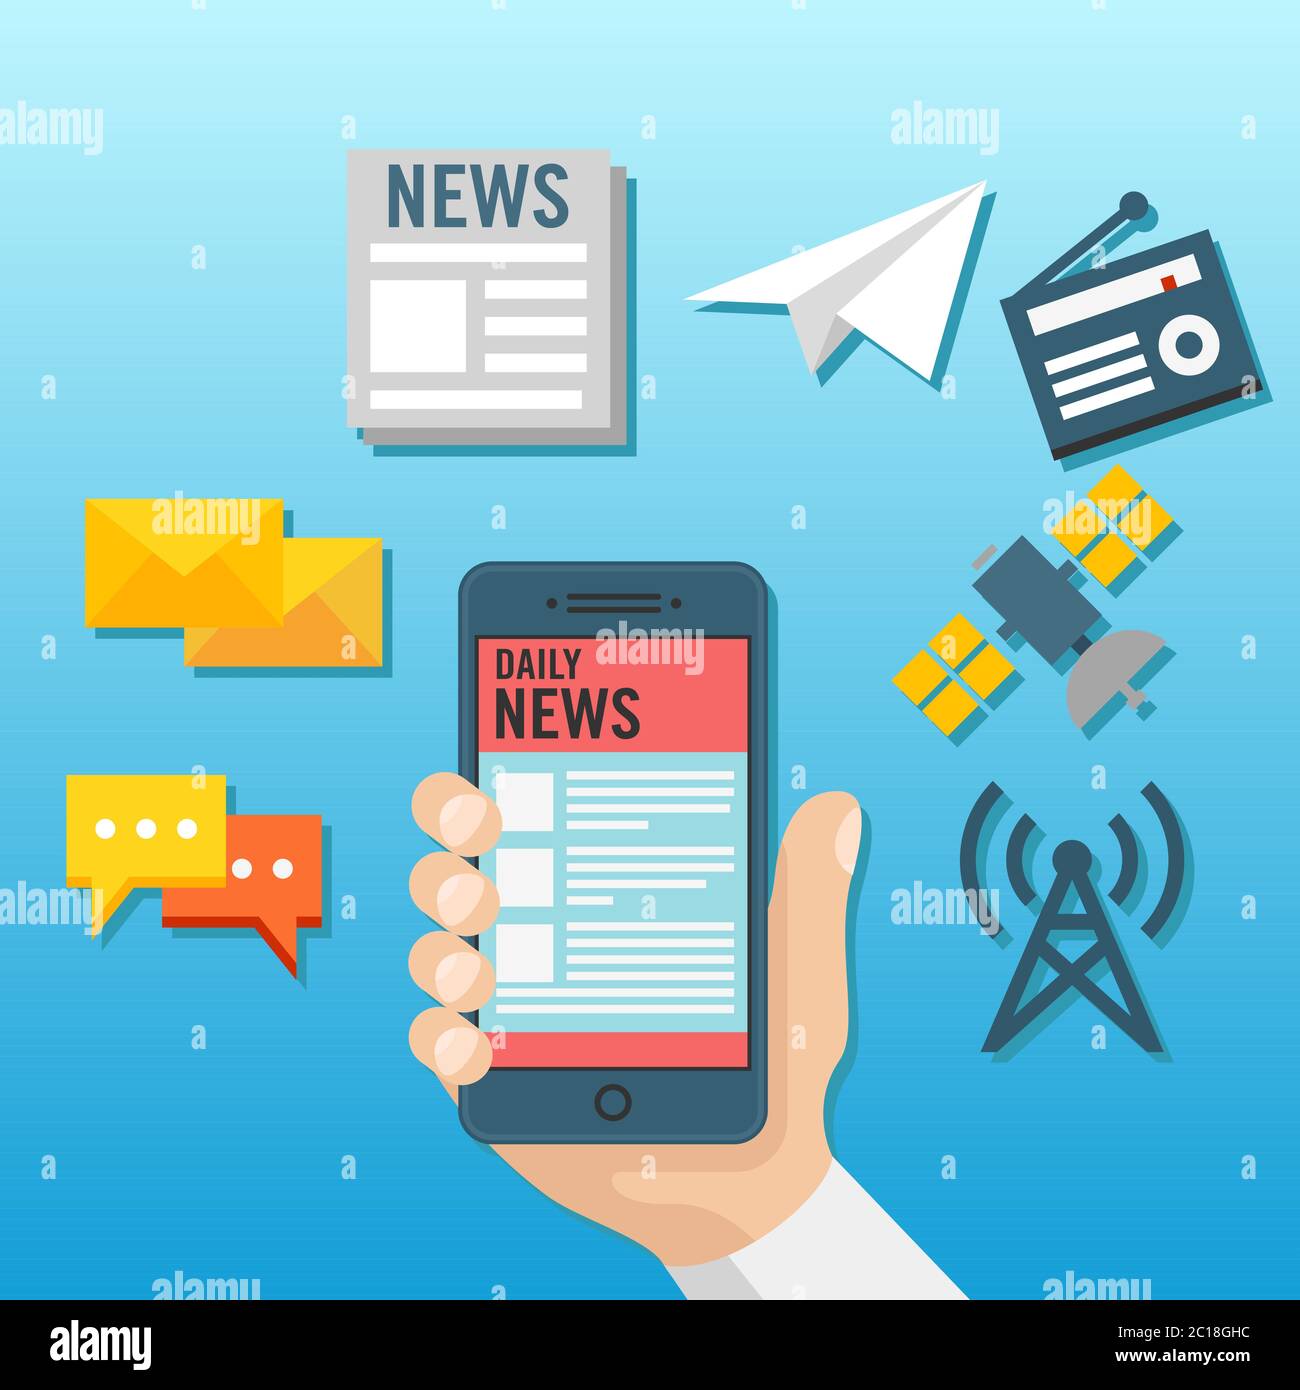 Viral news search through online information technology. Information technology graphic resources. Reading online news from a smart phone vector. Stock Vector